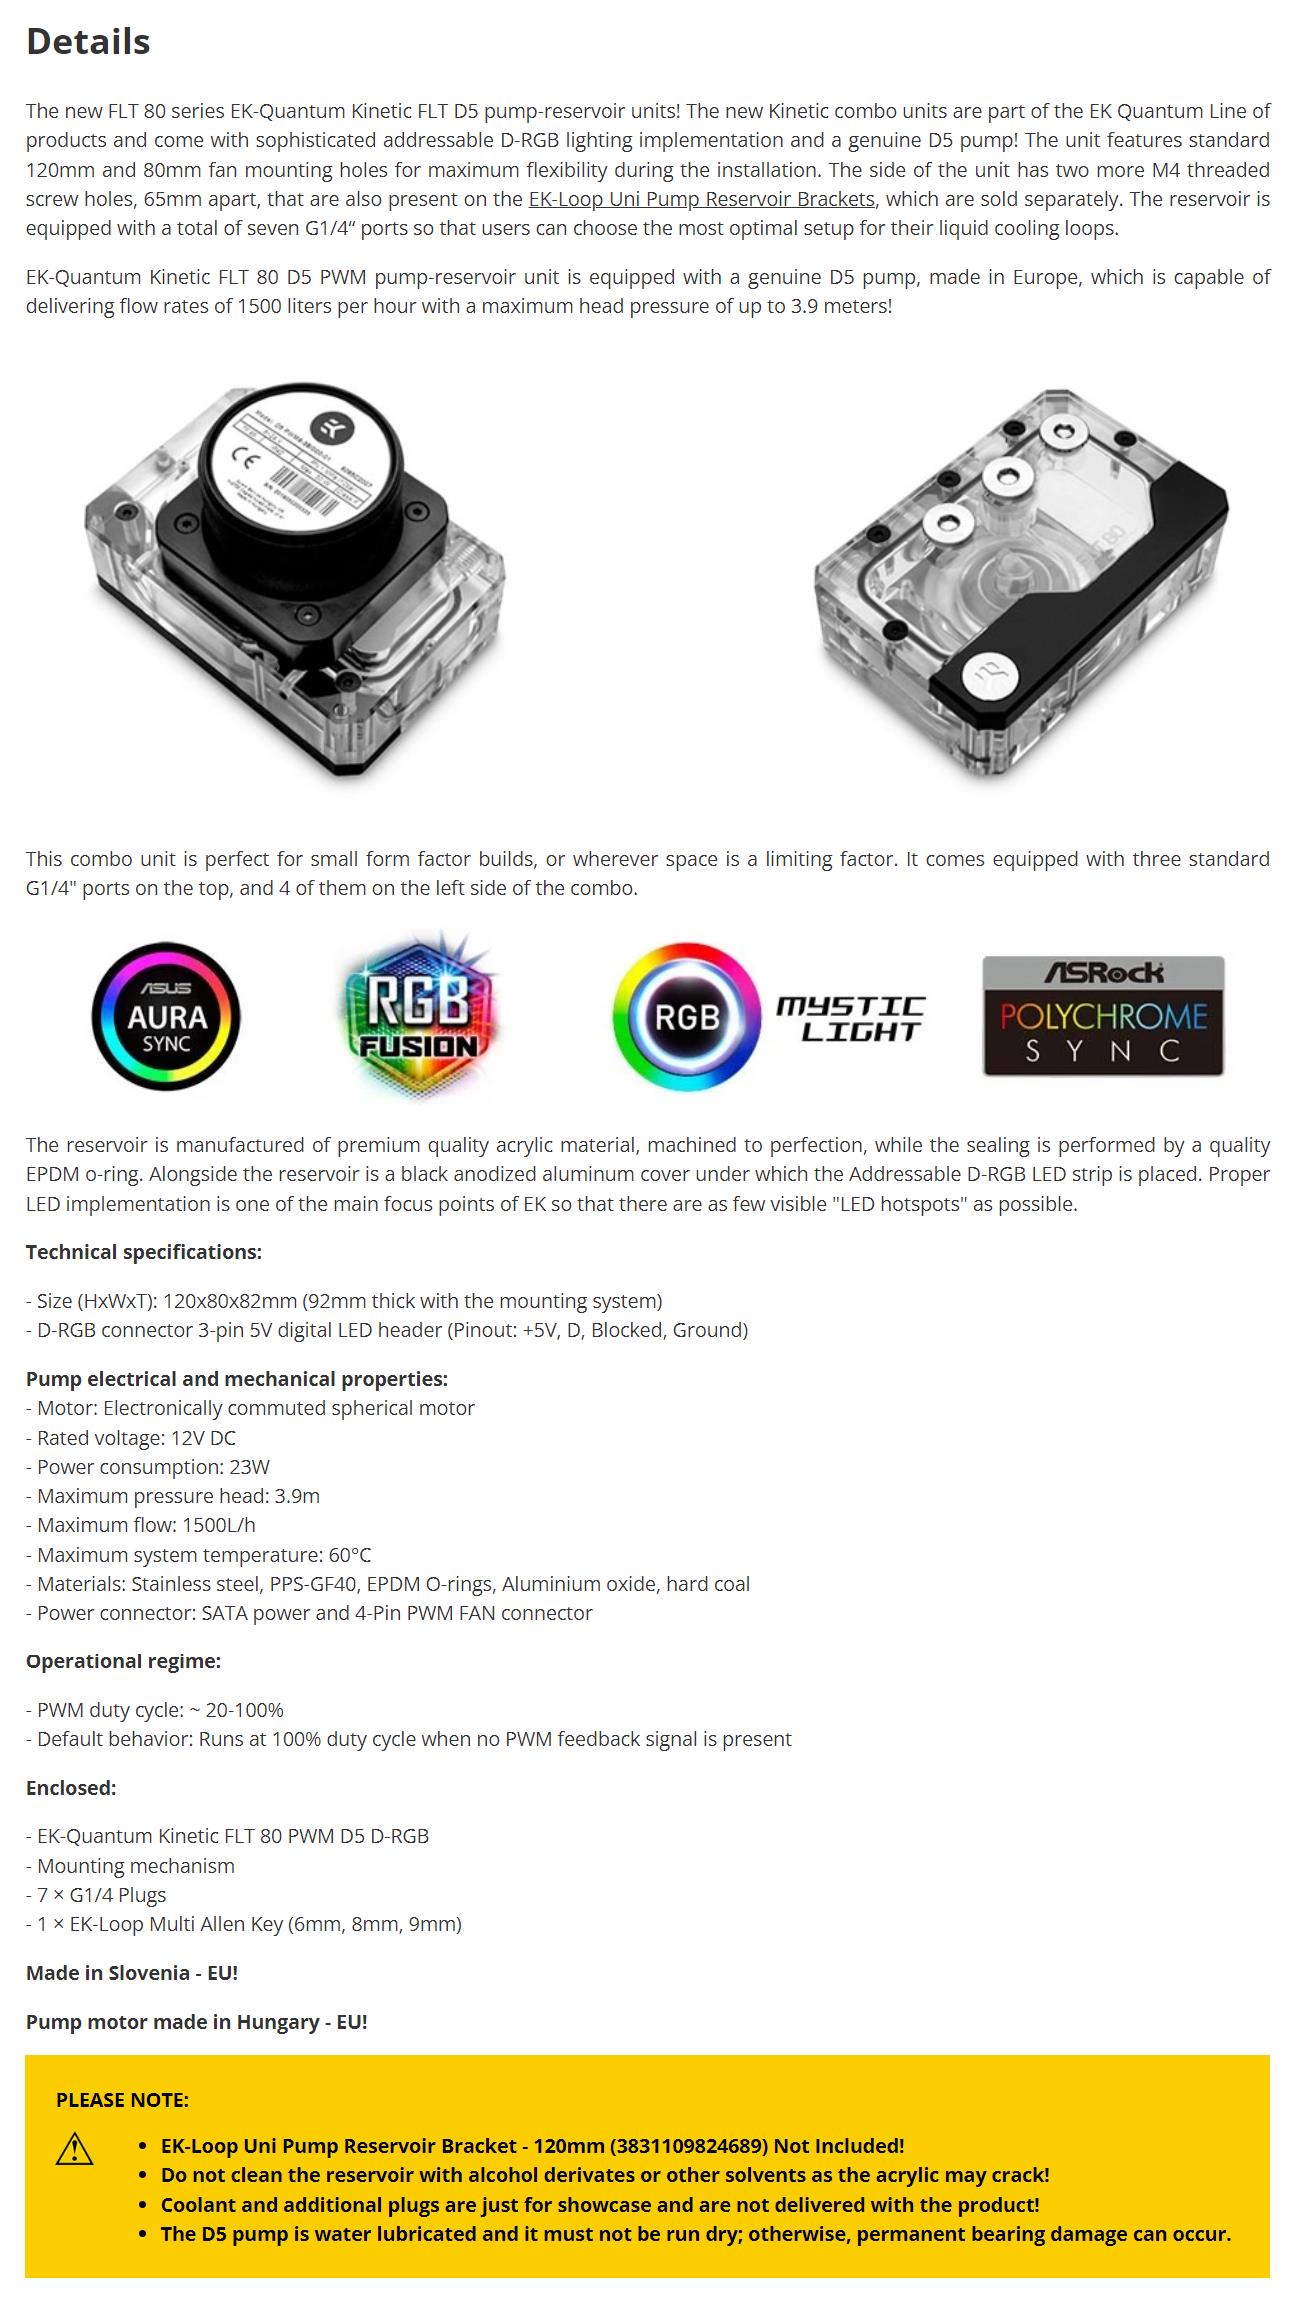 A large marketing image providing additional information about the product EK Quantum Kinetic FLT 80 D5 PWM D-RGB - Plexi - Additional alt info not provided